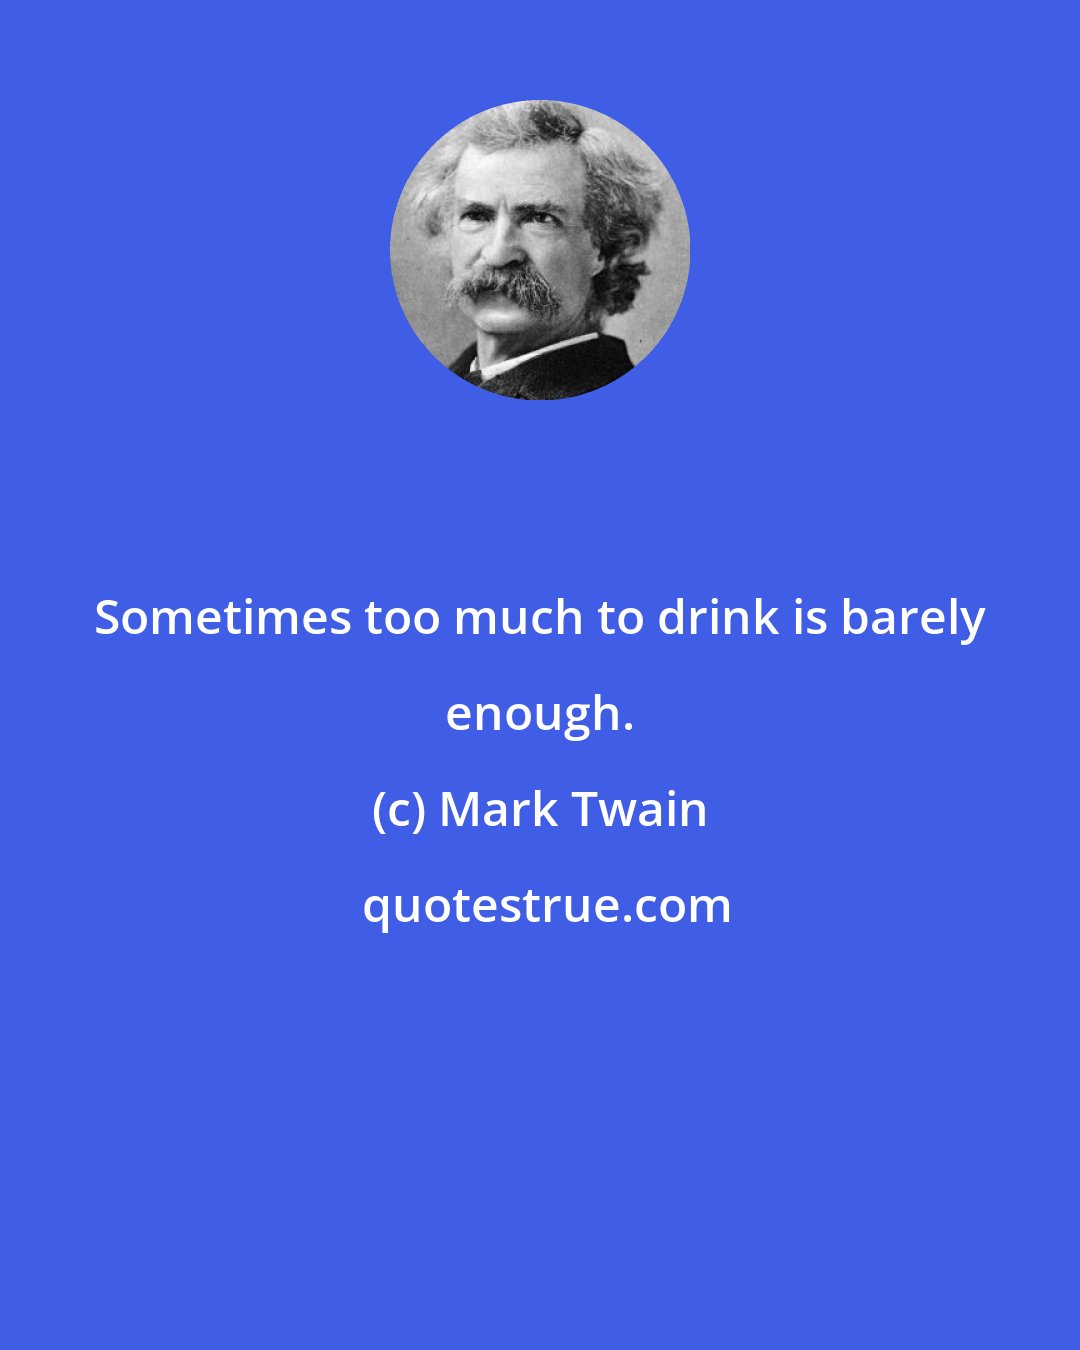 Mark Twain: Sometimes too much to drink is barely enough.